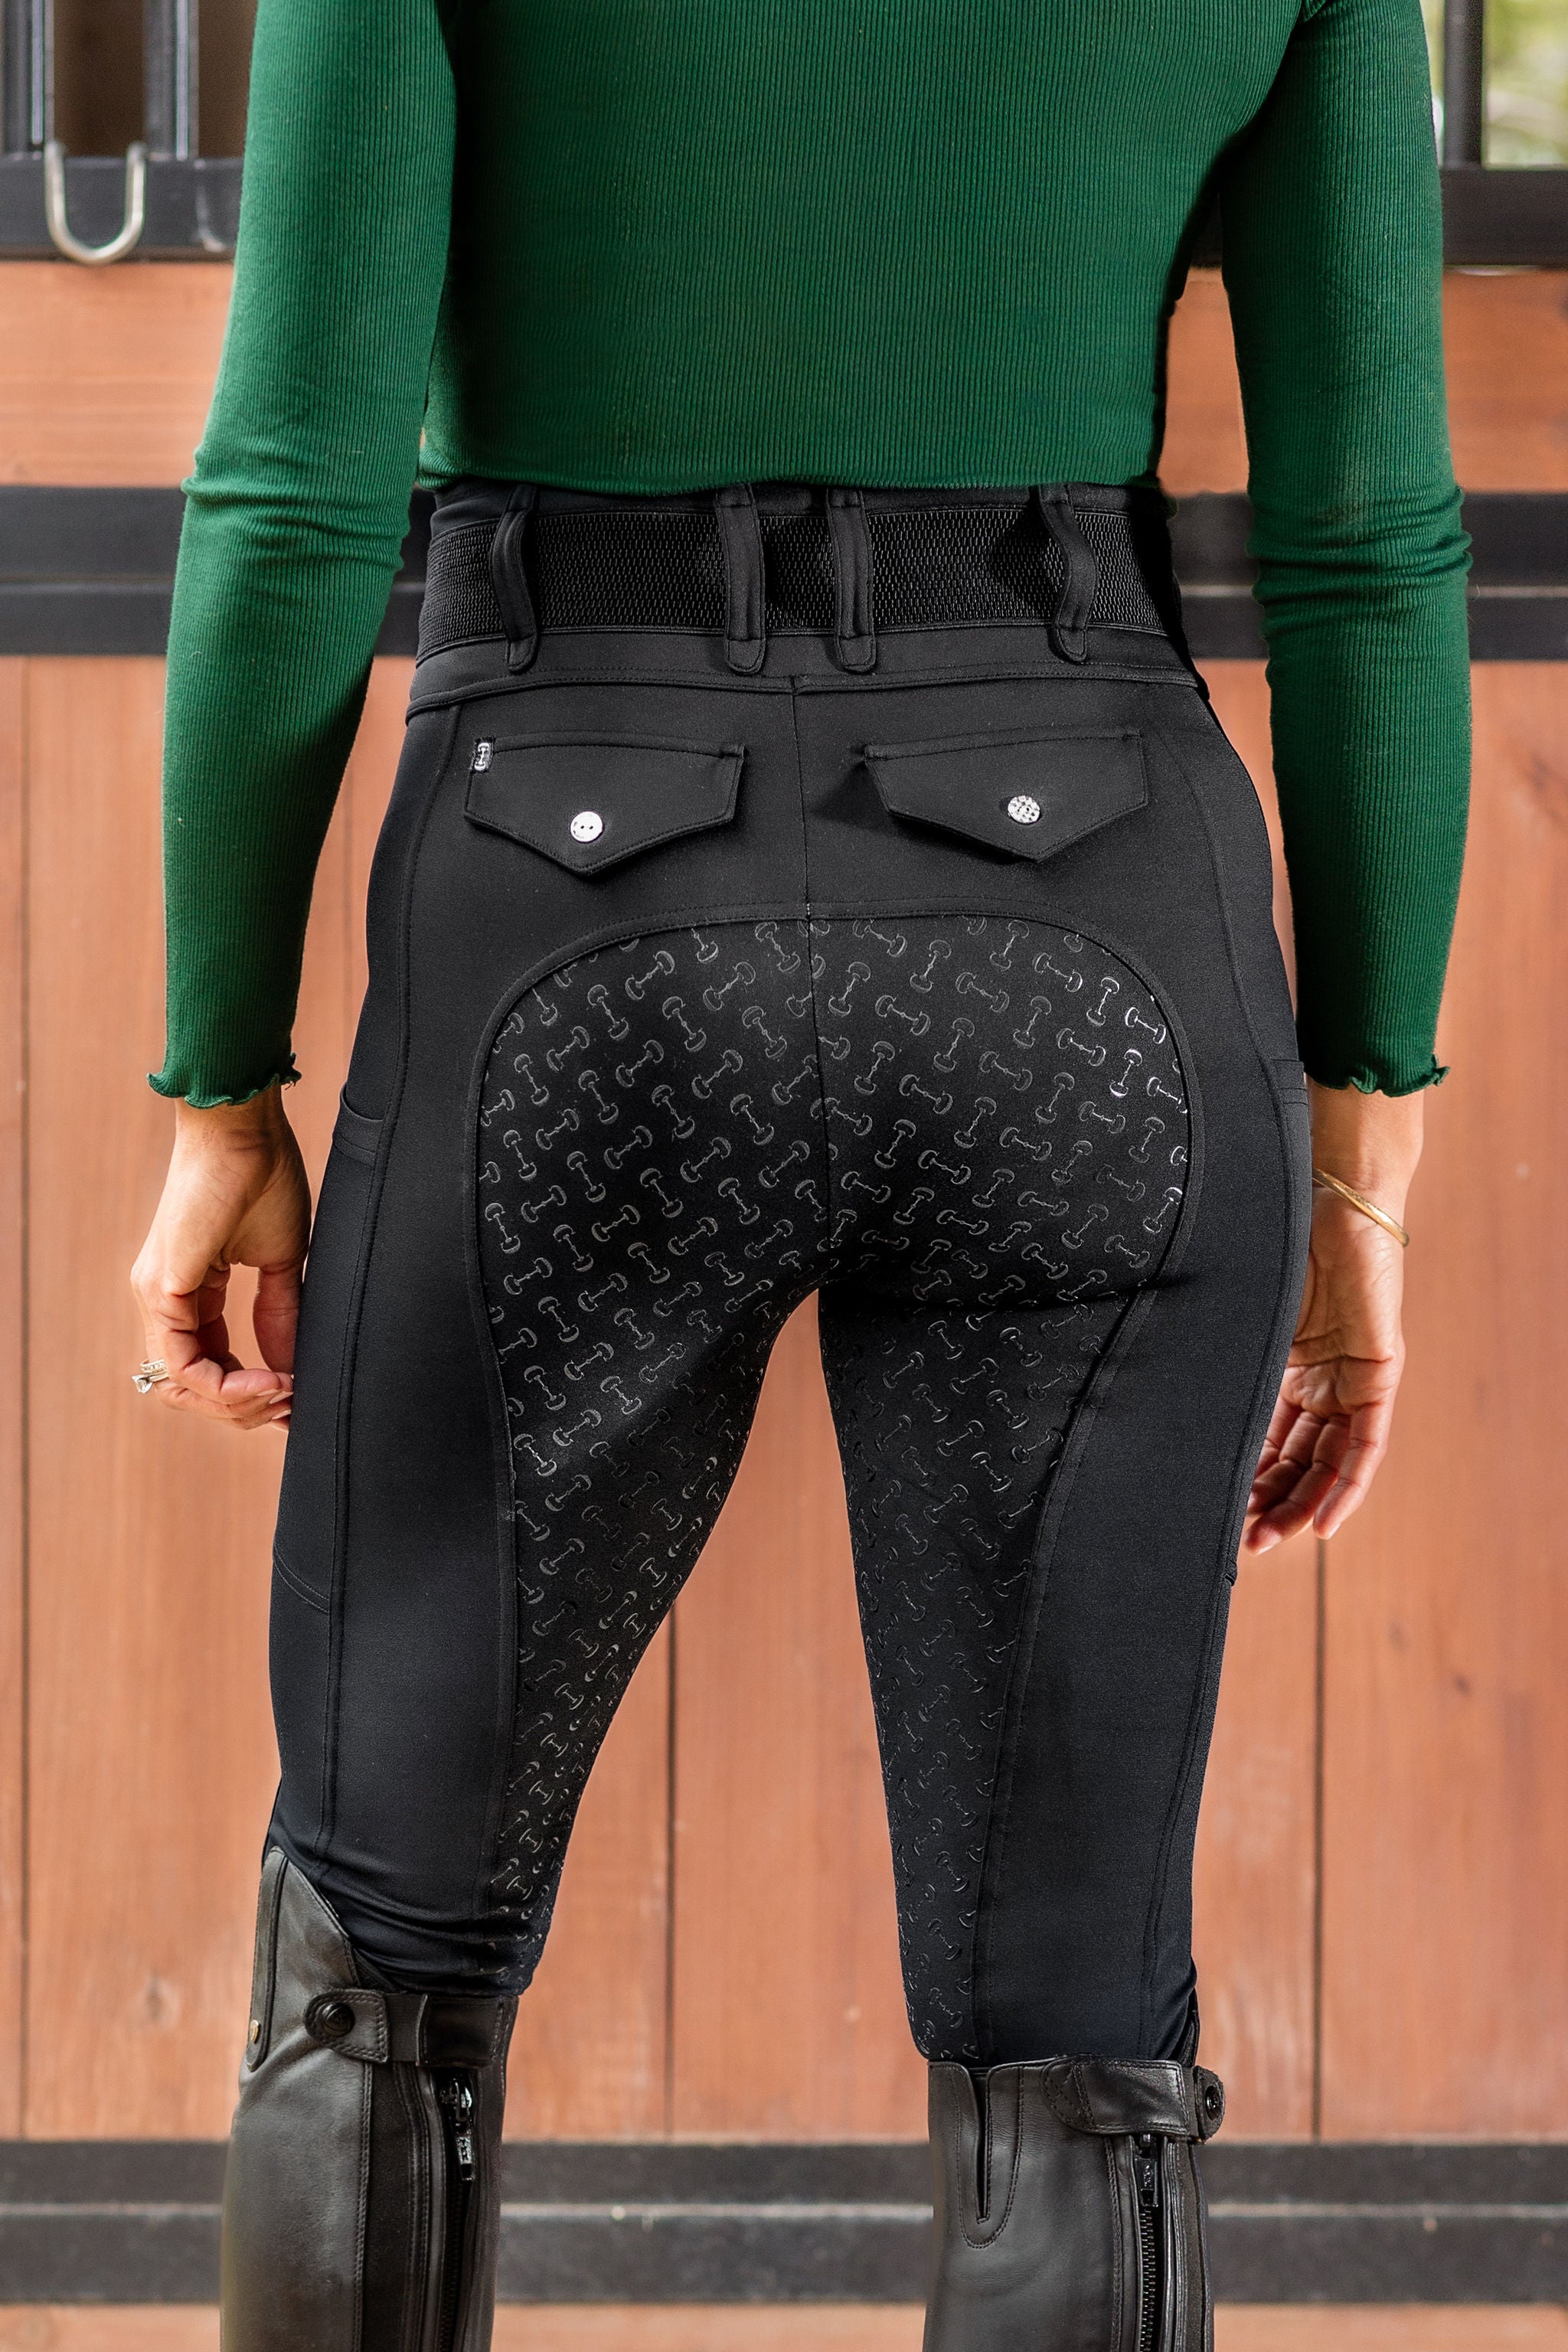 Backside view of woman wearing Canter Culture's riding tight showing back pockets and high waist.